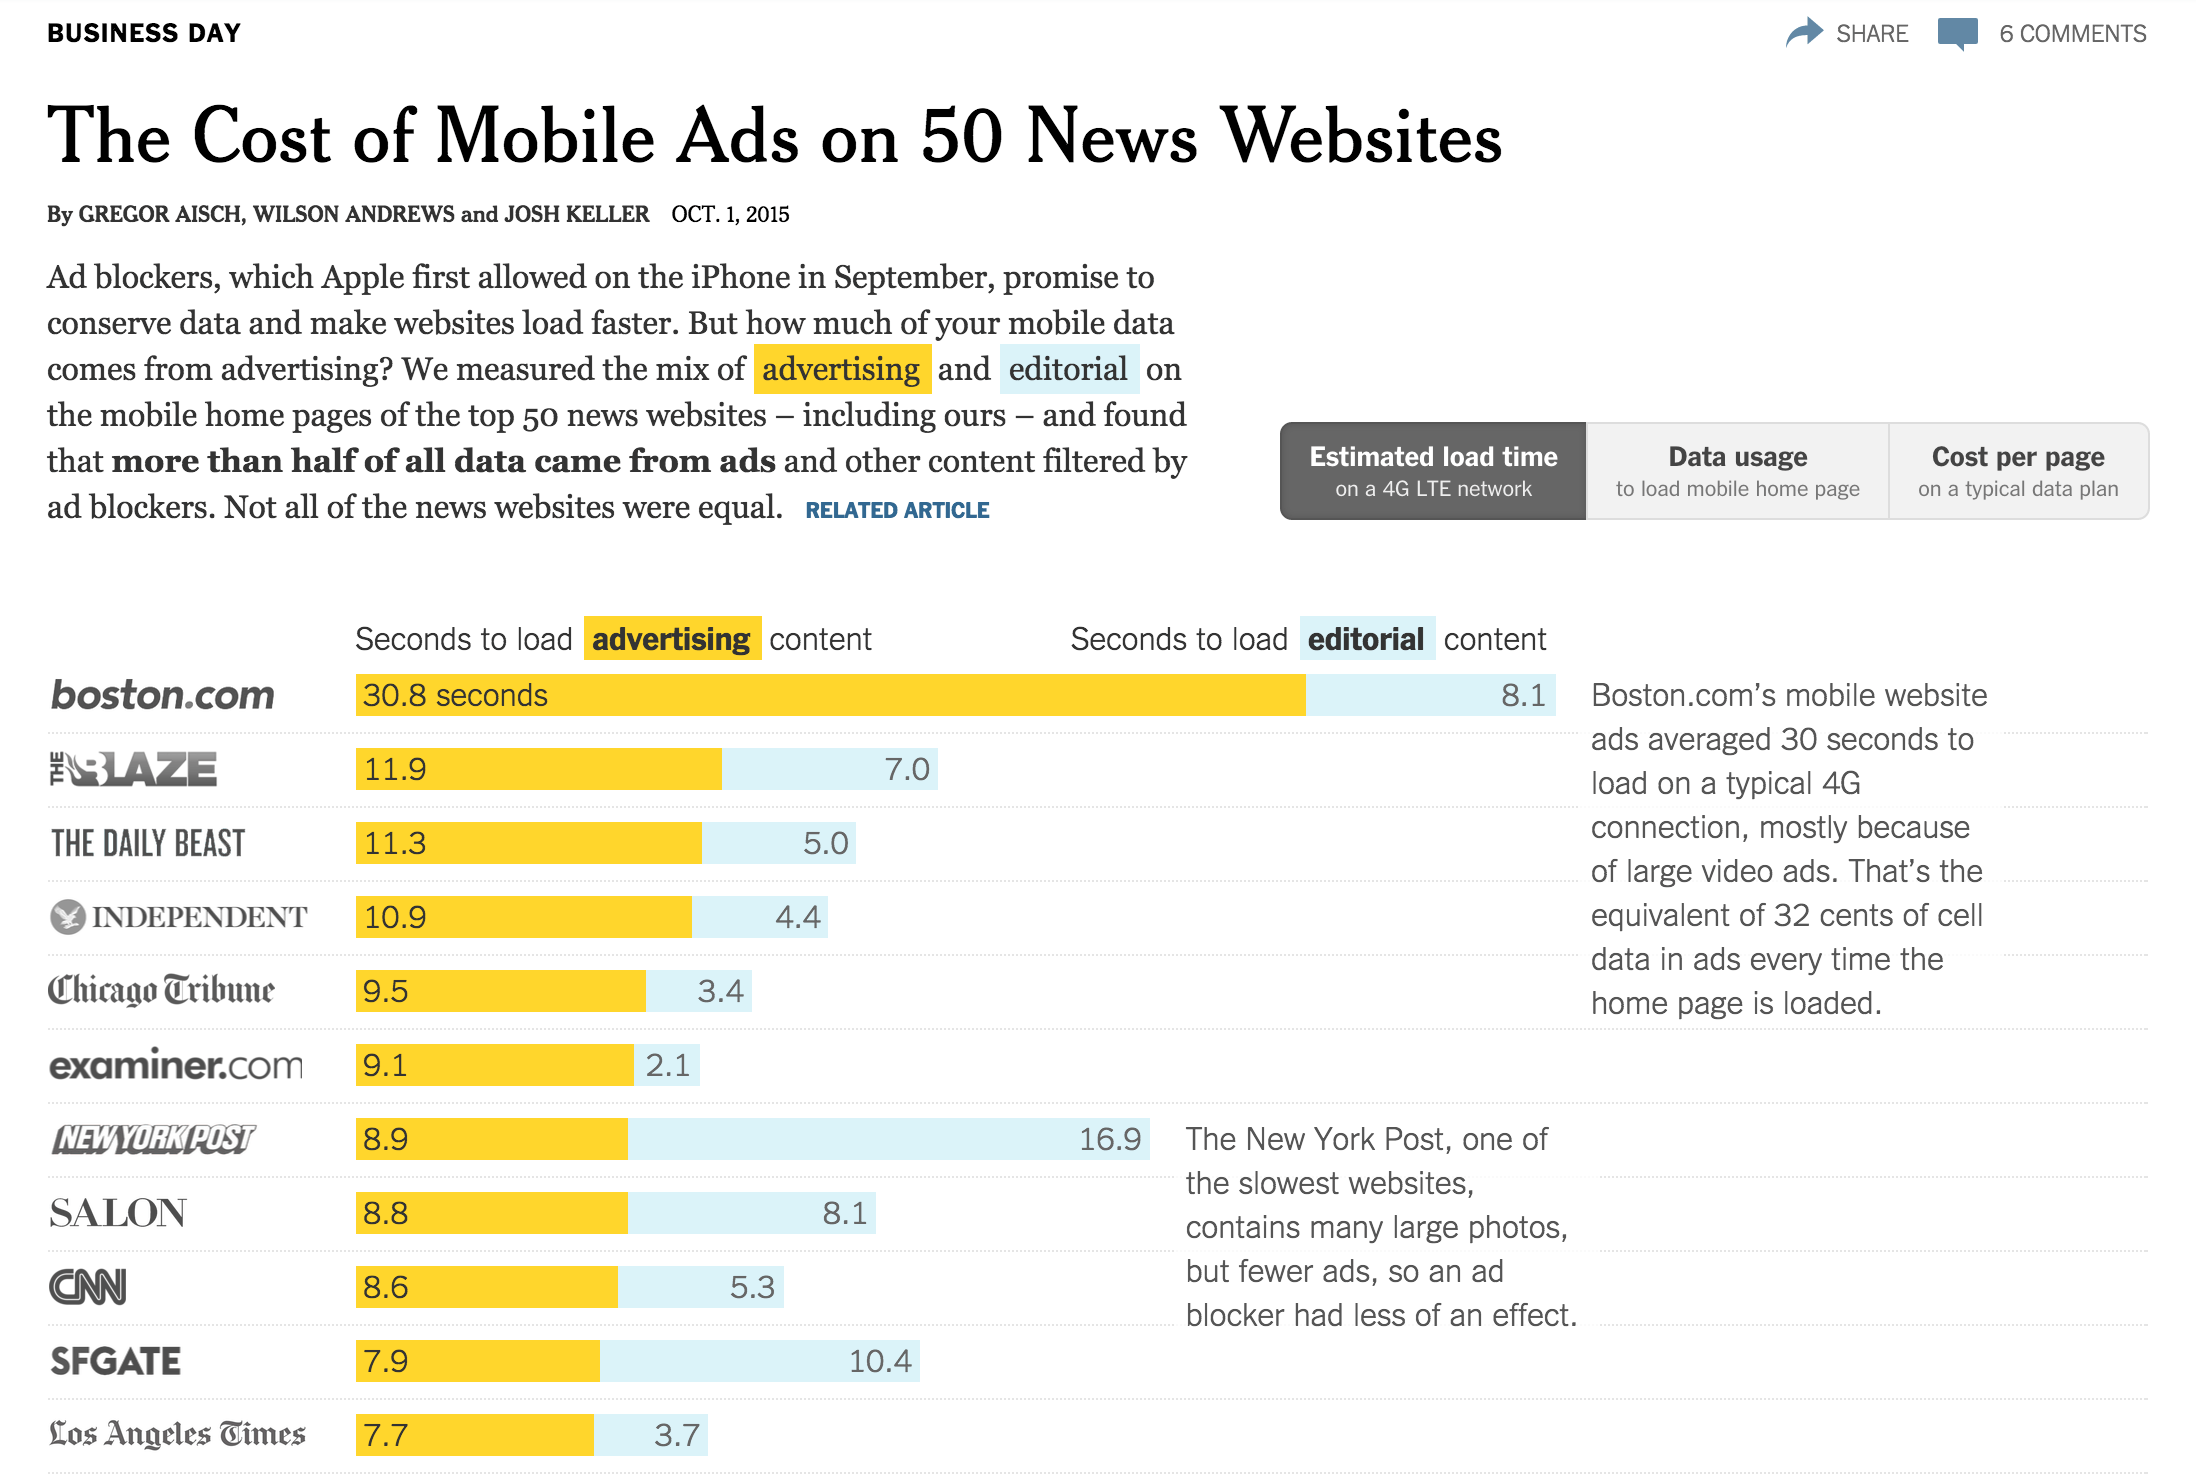 The Cost of Mobile Ads on 50 News Websites